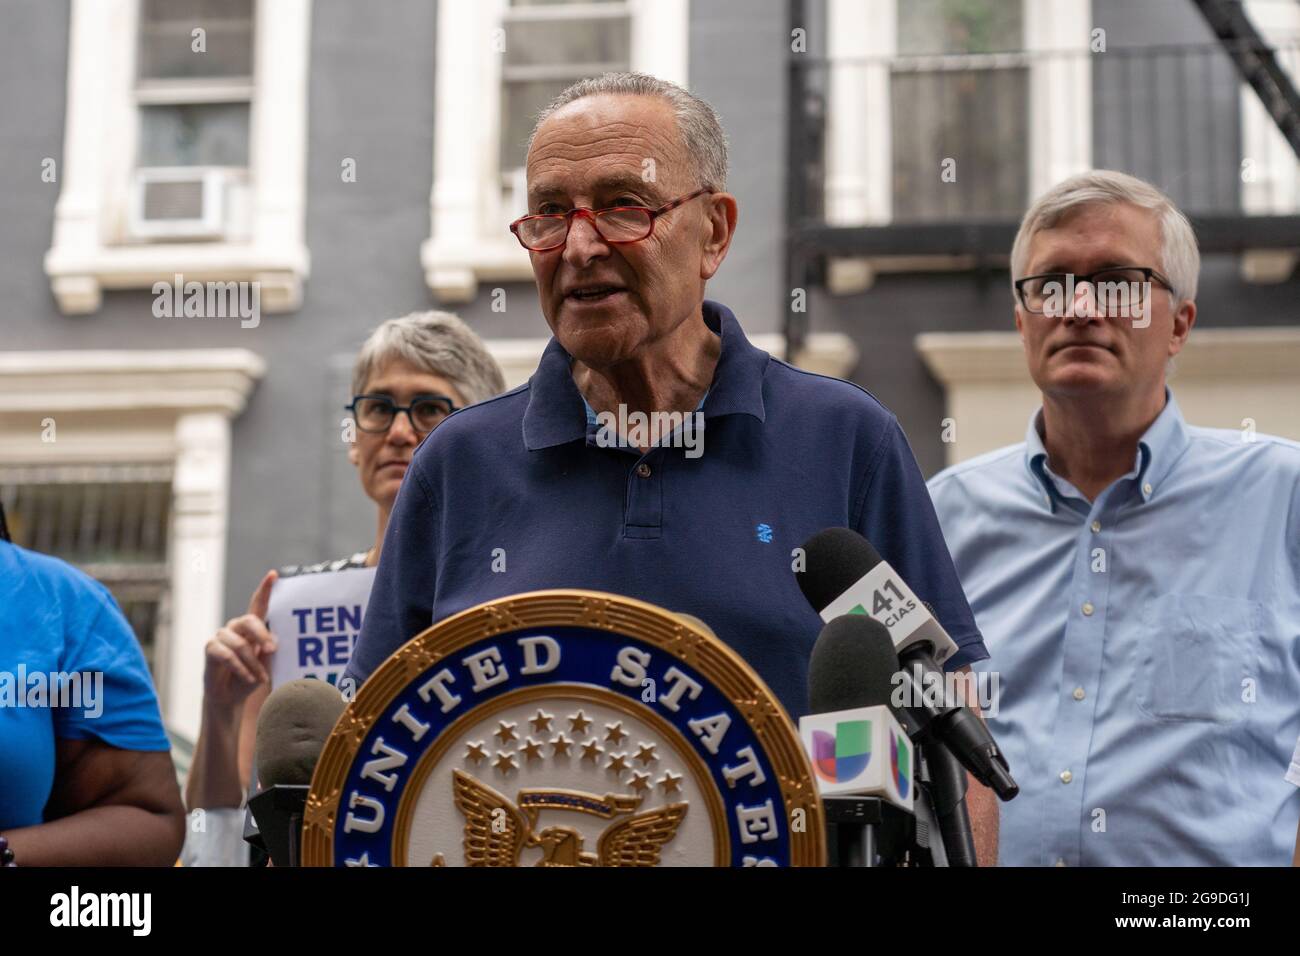 NEW YORK, NY – JULY 25: Senate Majority Leader Senator Chuck Schumer (D-NY) speaks at a press conference at Hells Kitchen on July 25, 2021 in New York City.  Standing alongside NY State Senator Brian Kavanagh, Assembly Member Richard Gottfried and community rent activists Sen. Chuck Schumer says that the Cuomo administration is failing to disburse the $2.4 billion in rent relief meant for New York that could be lost at the end of September if state doesn't release the money to needy tenants who were hit hard during covid-19 pandemic. Credit: Ron Adar/Alamy Live News Stock Photo